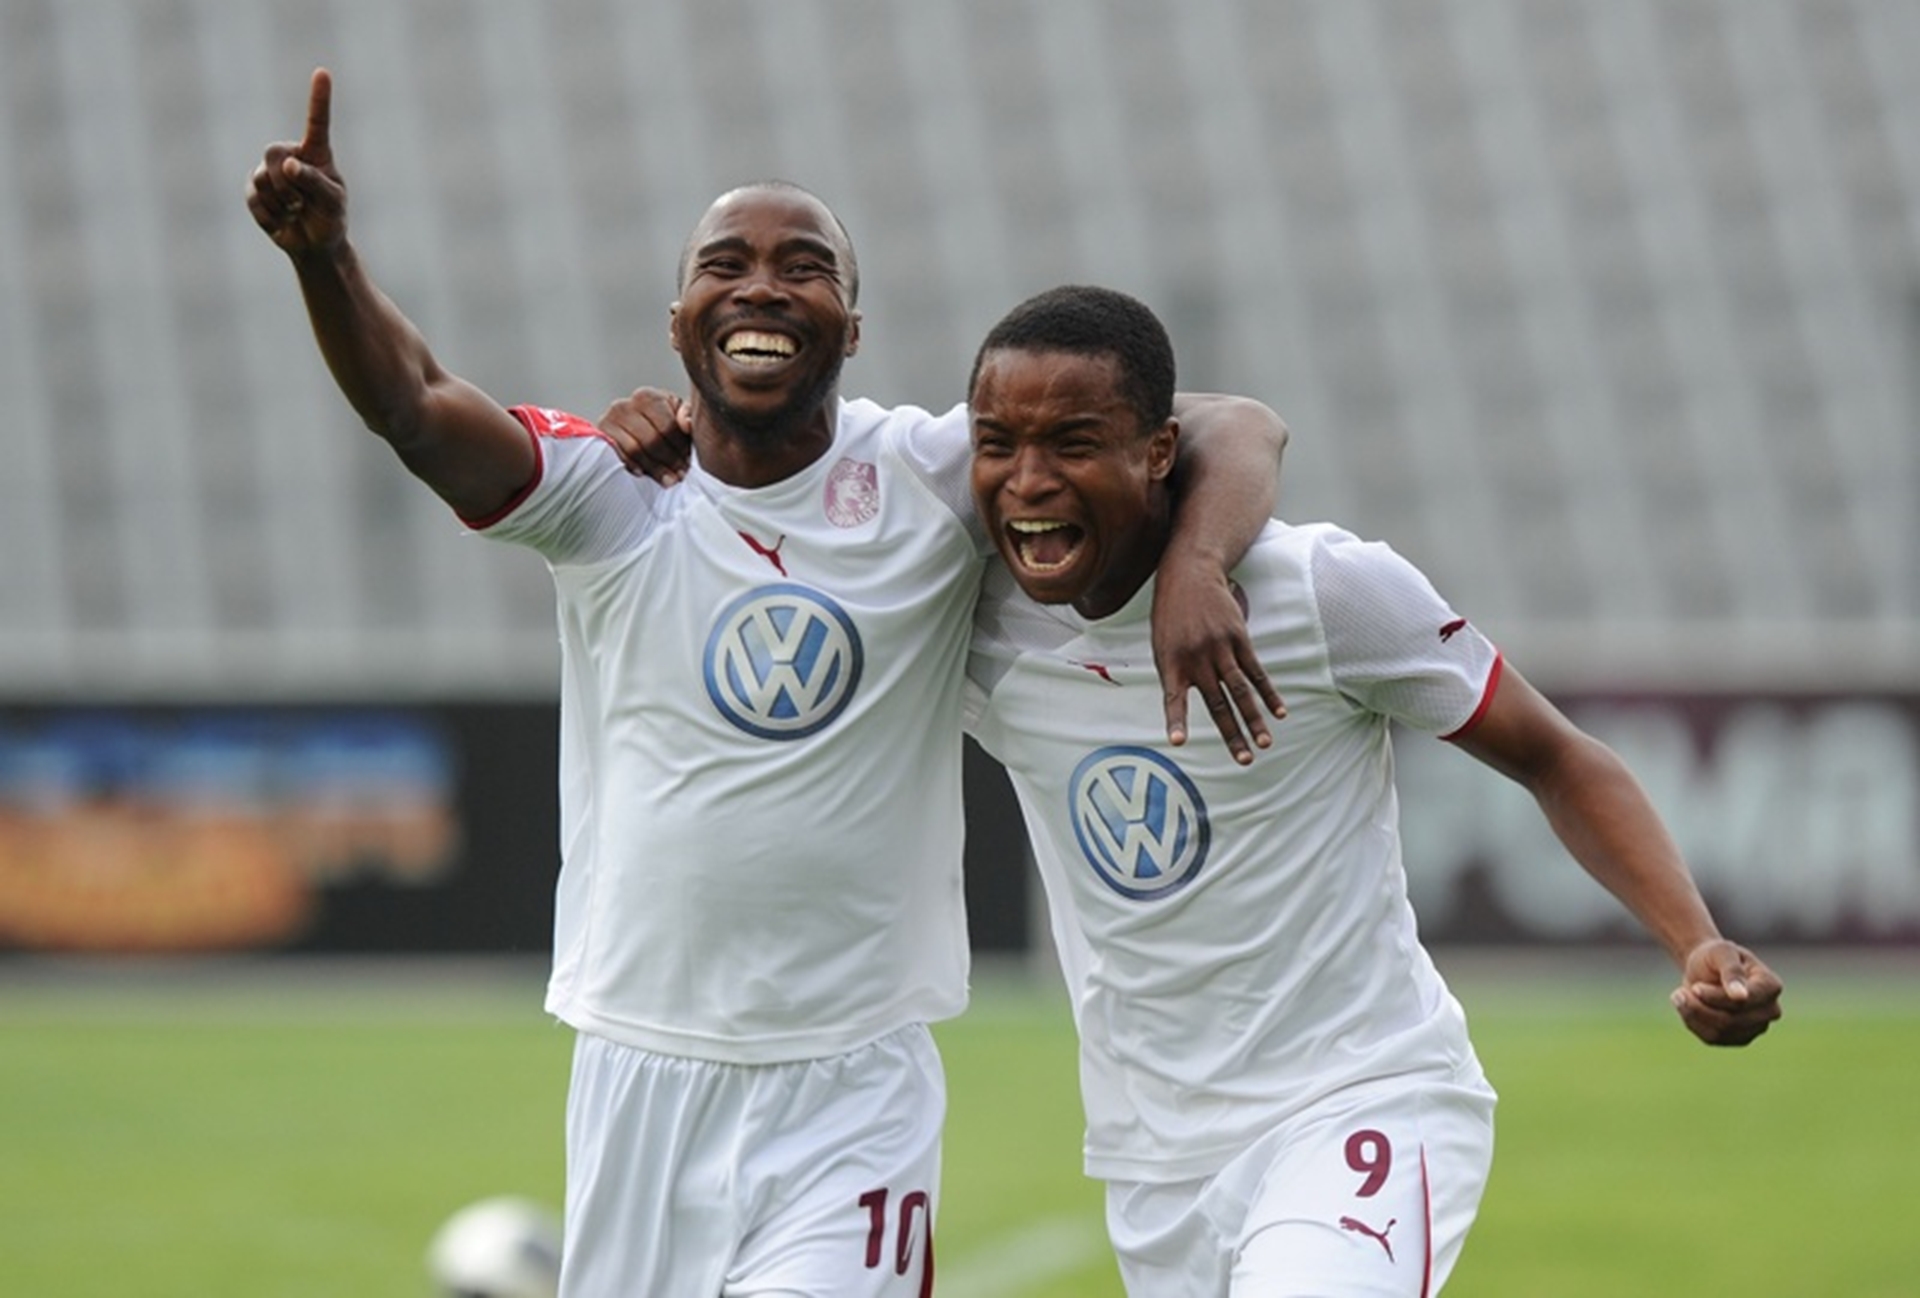 Volkswagen South Africa congratulates Moroka Swallows on its performance in the 2011/2012 Absa Premiership League